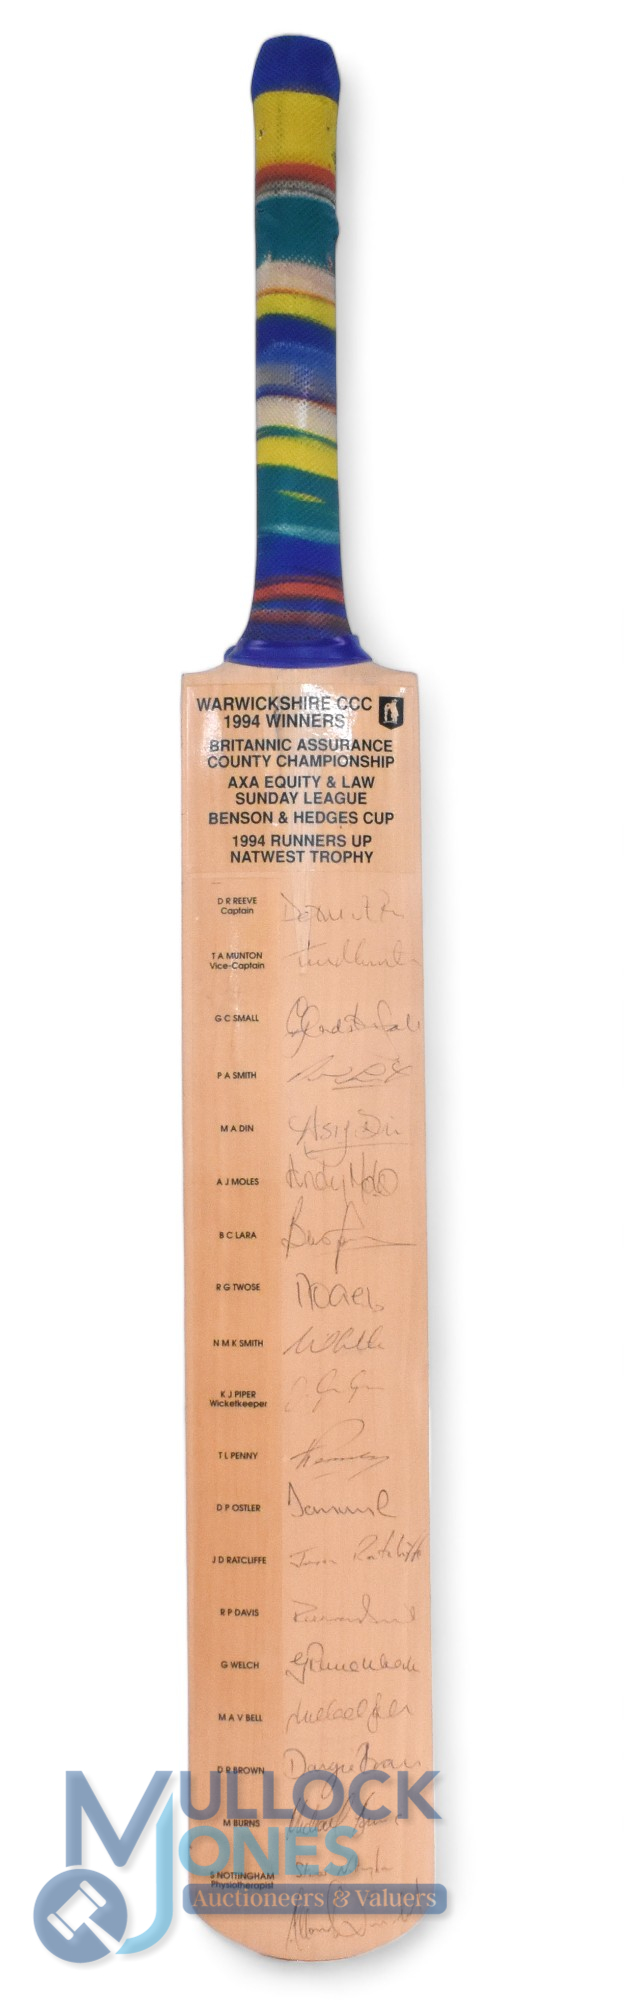 Warwickshire CCC 1994 Winners Signed Cricket Bat by D R Reeve, T A Munton, G C Small, P A Smith, M A